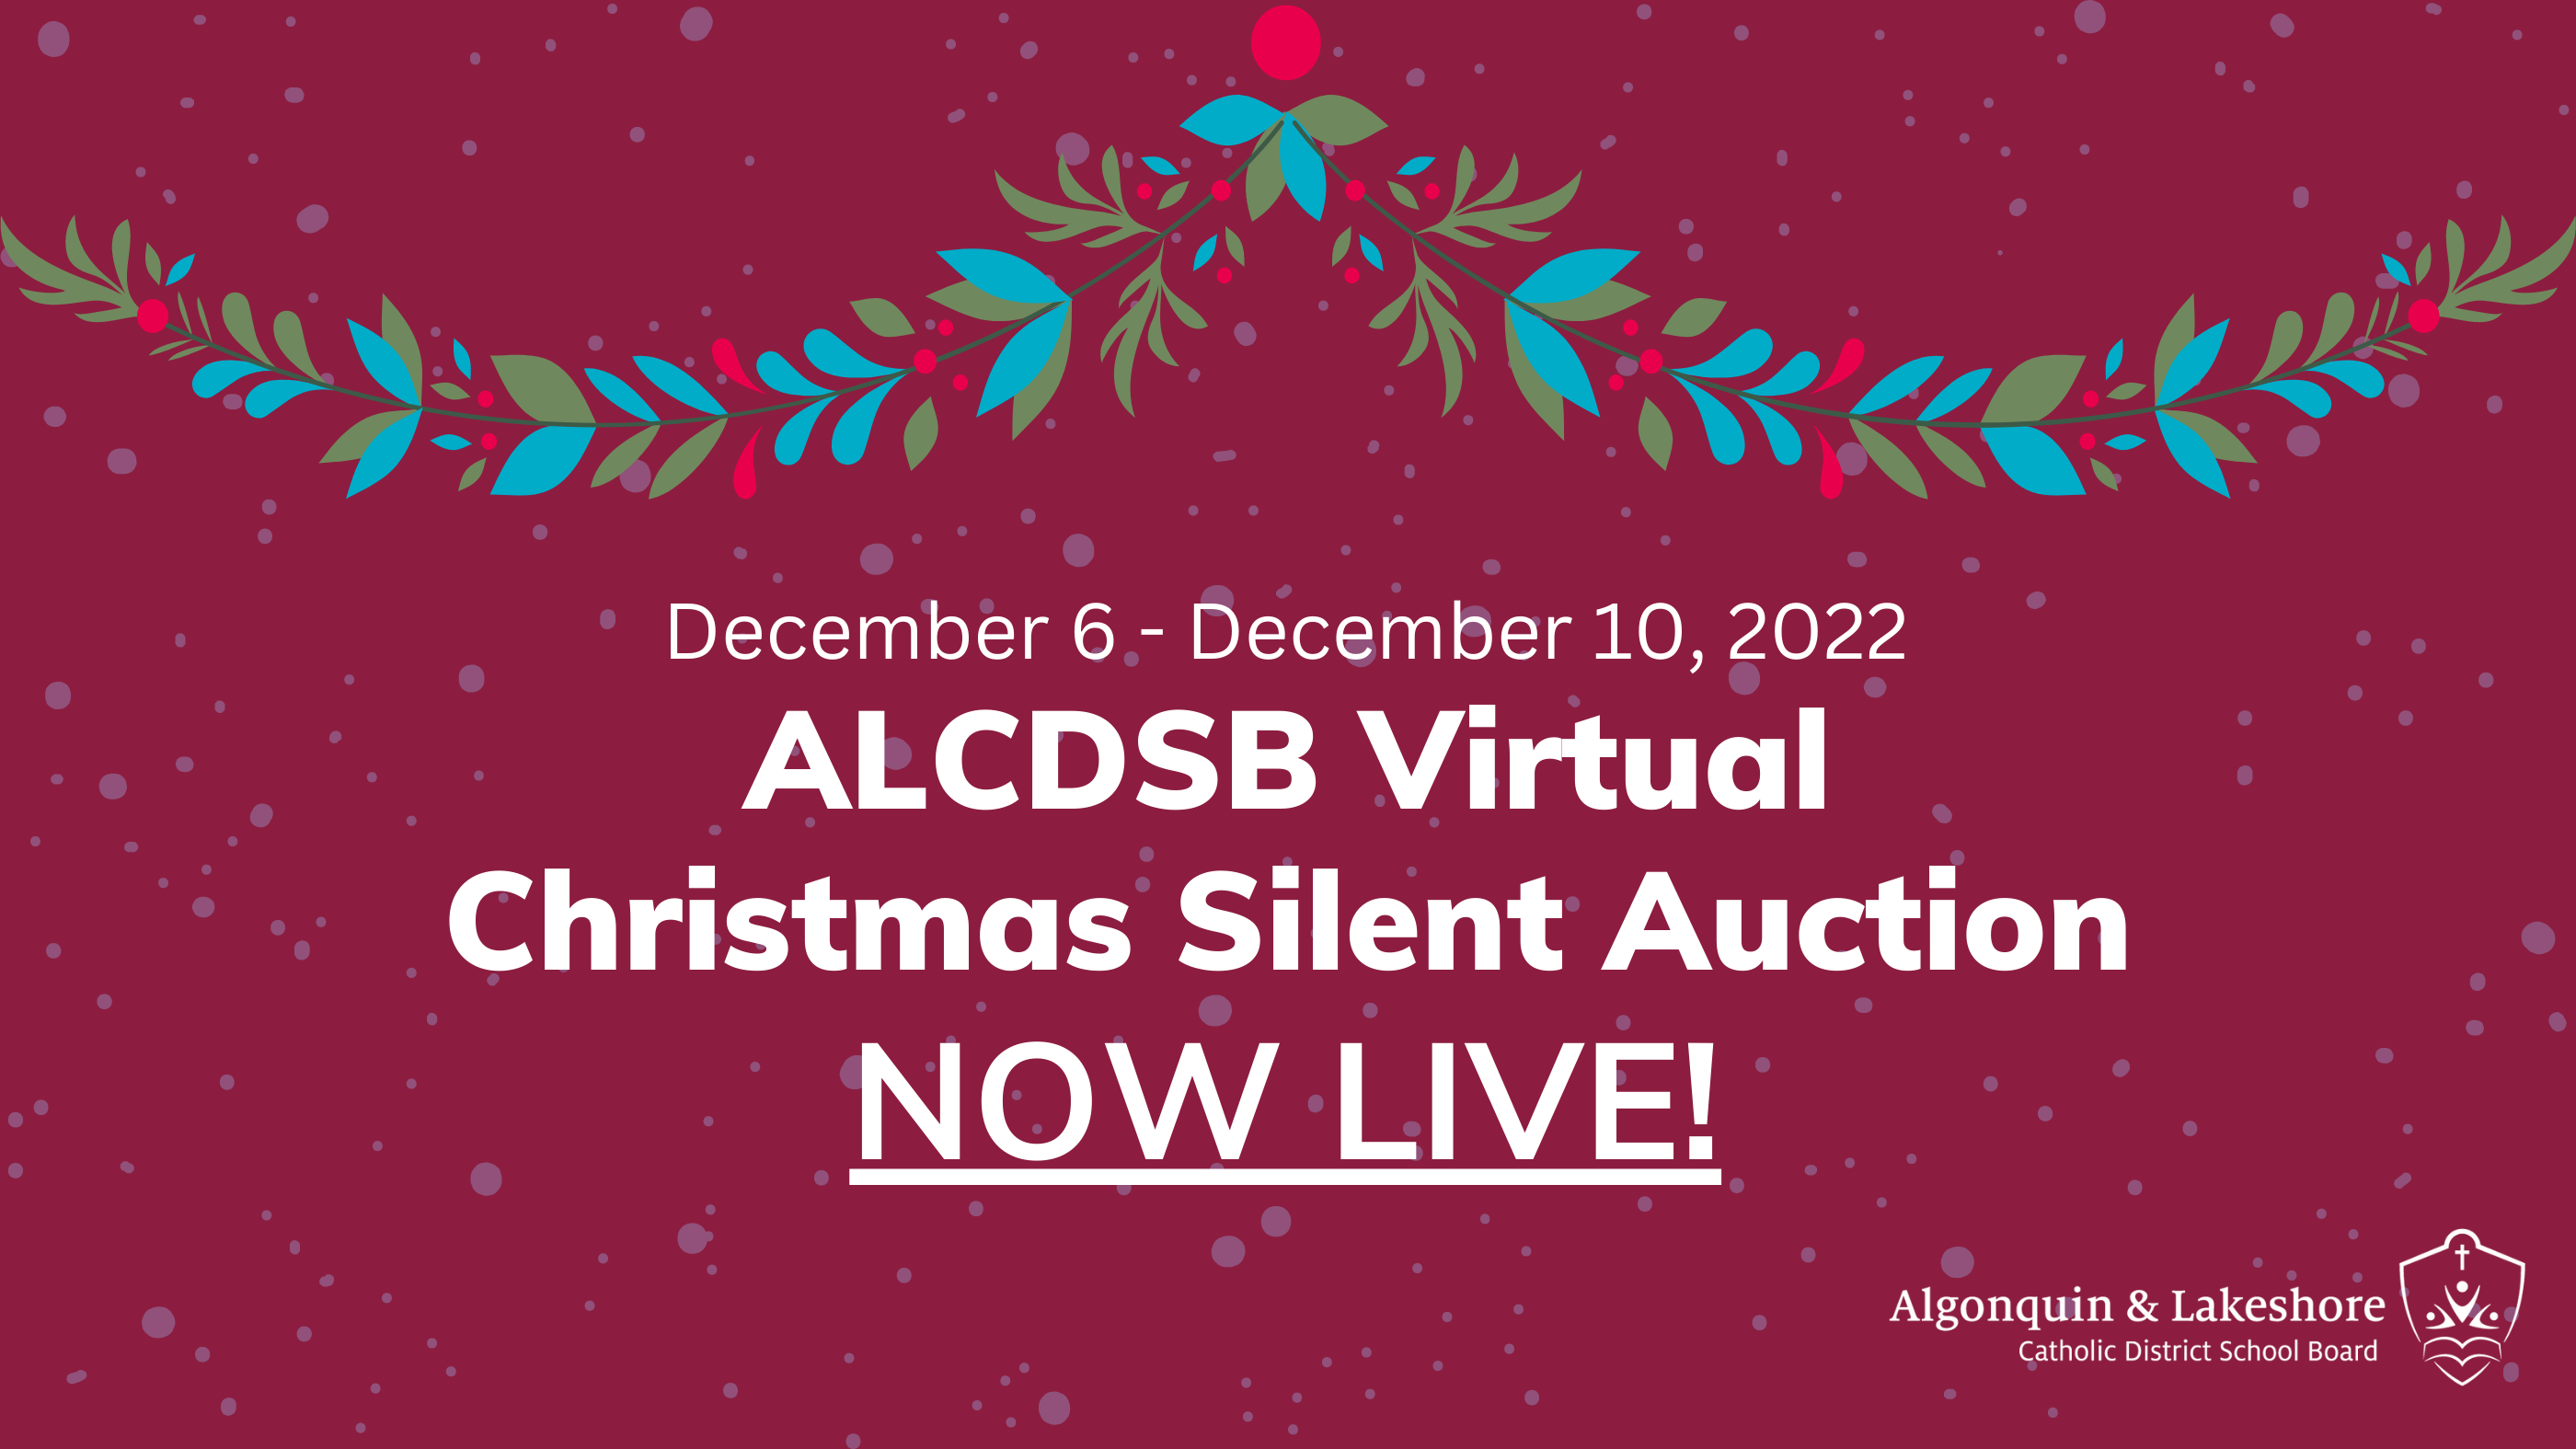 Text over burgundy background with snow and a colourful wreath. Text: "ALCDSB Virtual Christmas Silent Auction NOW LIVE!"